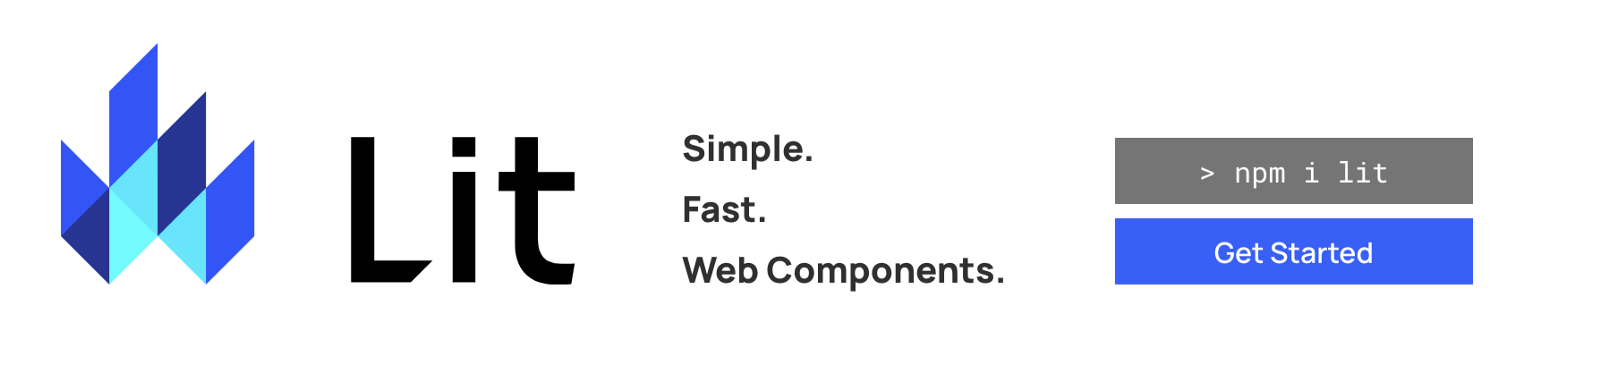 Lit header - Simple. Fast. Web Components.